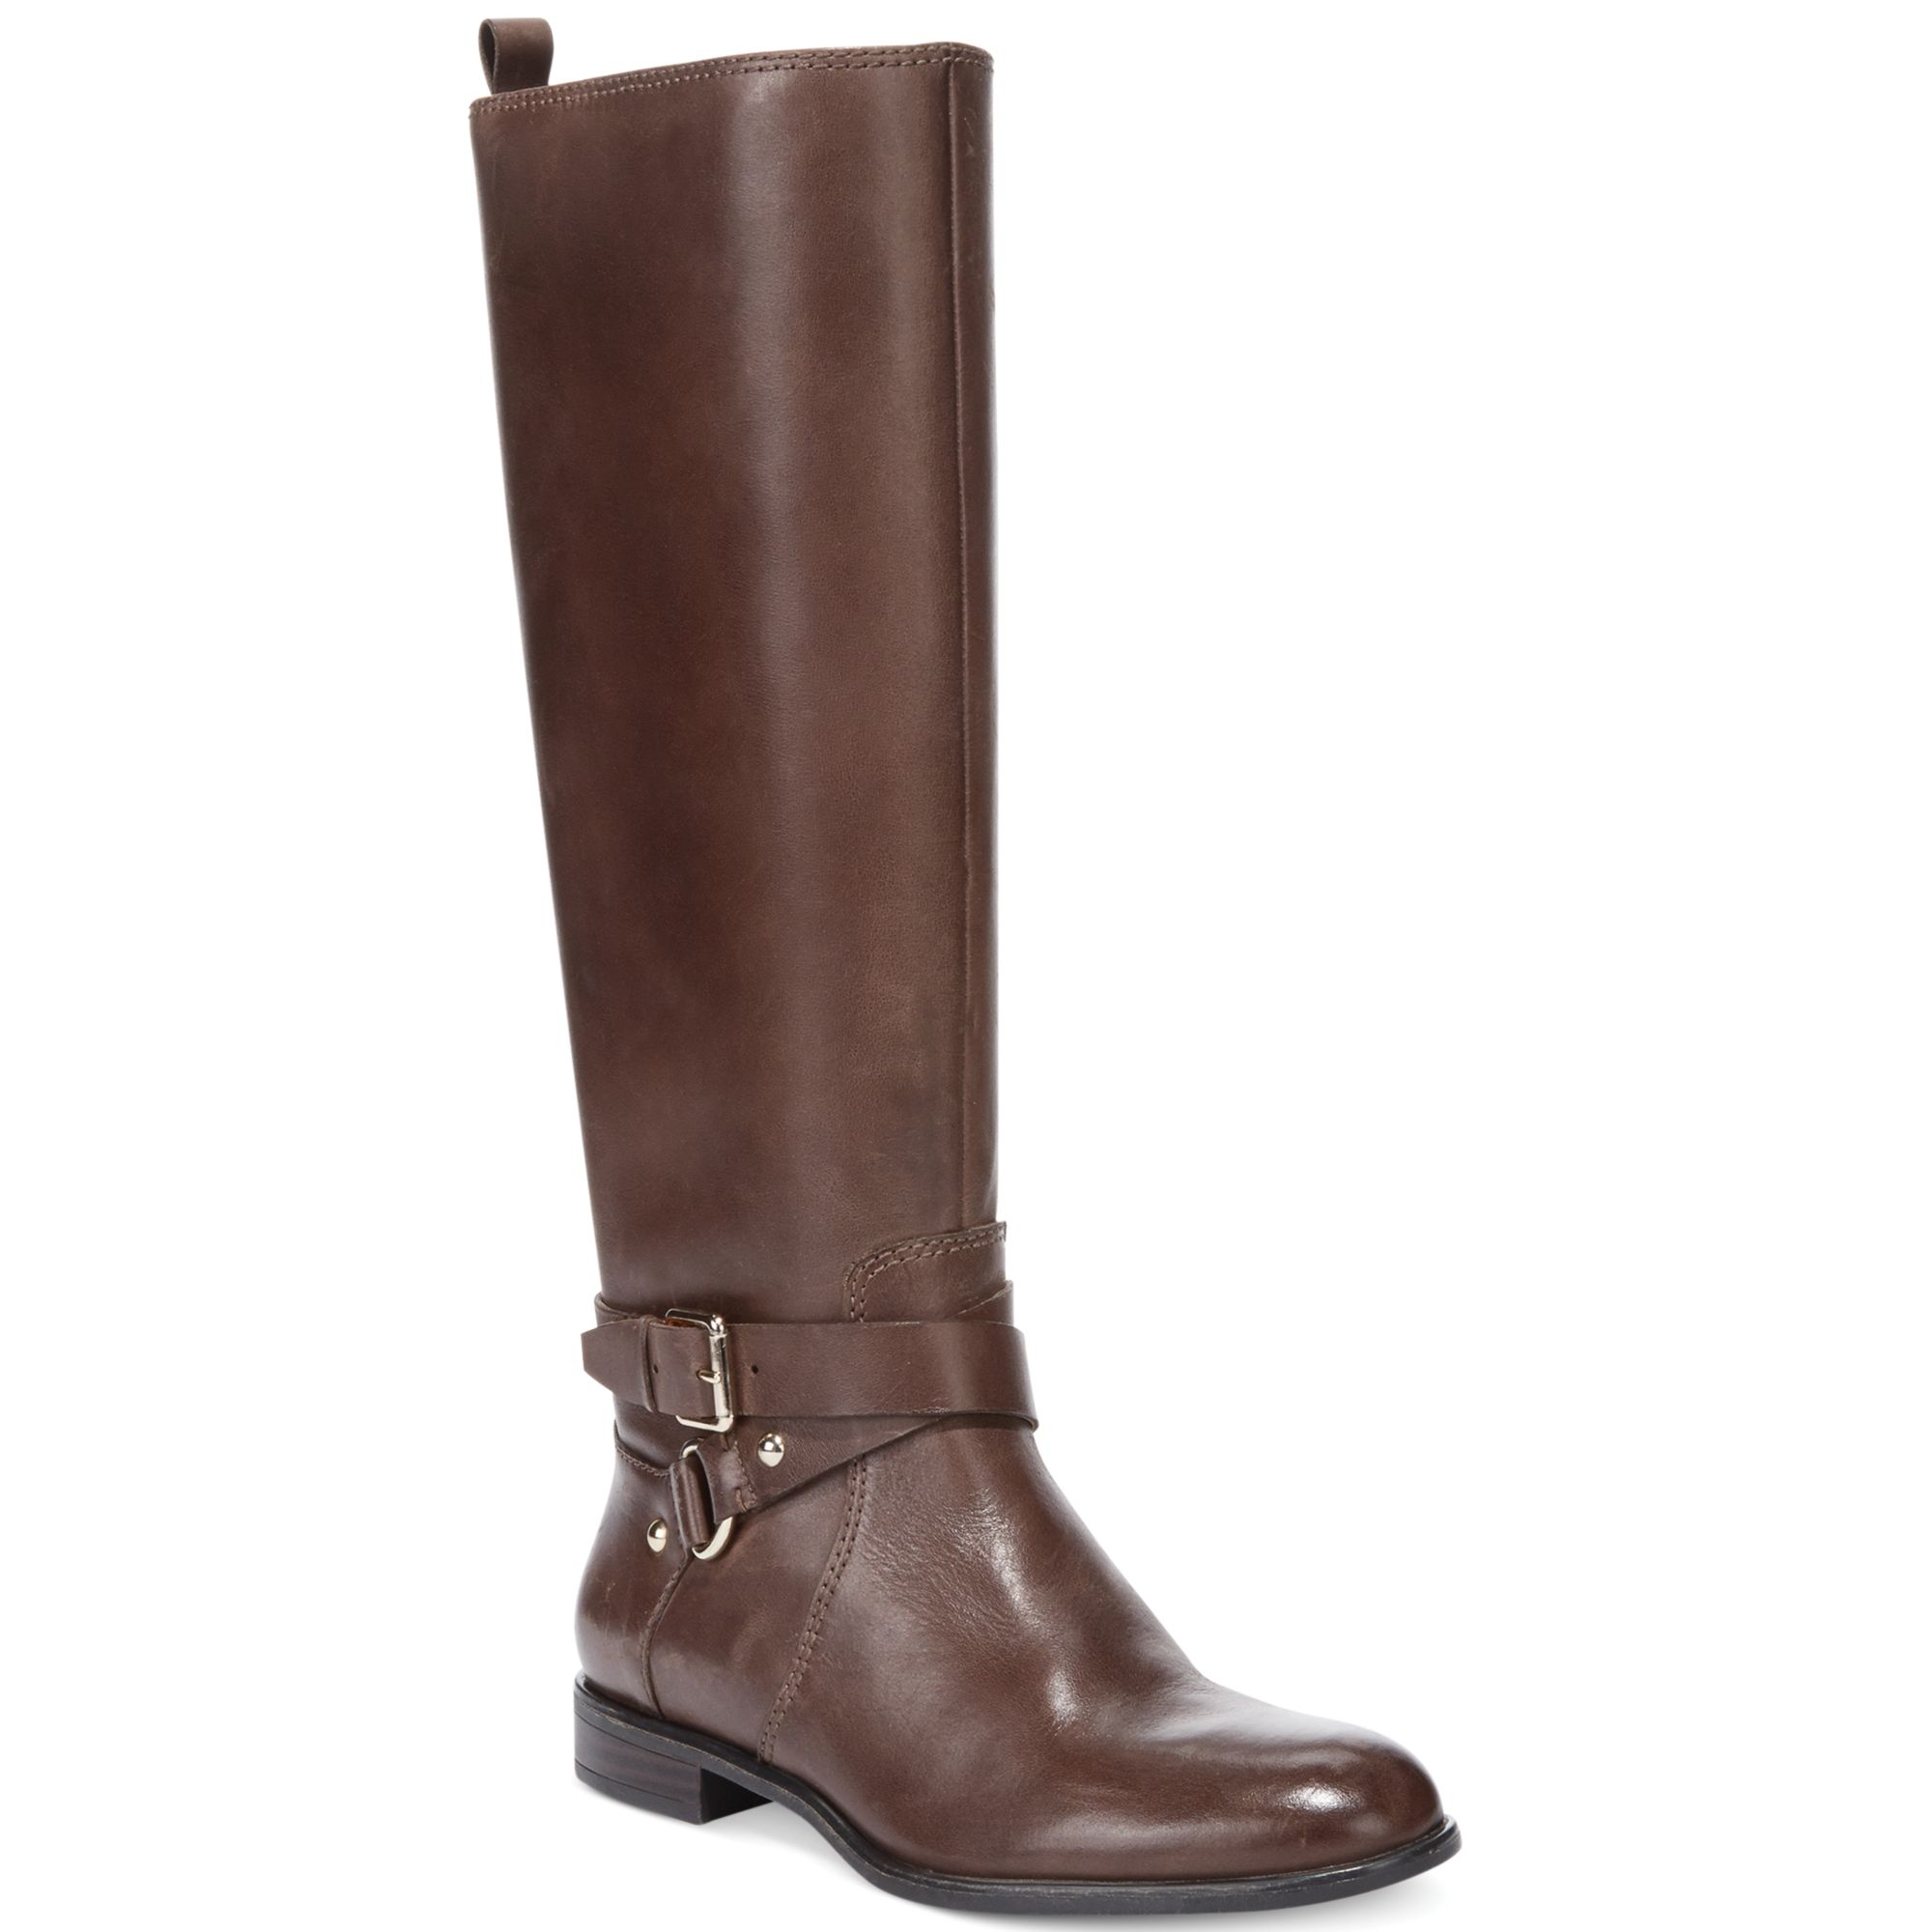 Enzo Angiolini Daniana Riding Boots in Brown | Lyst